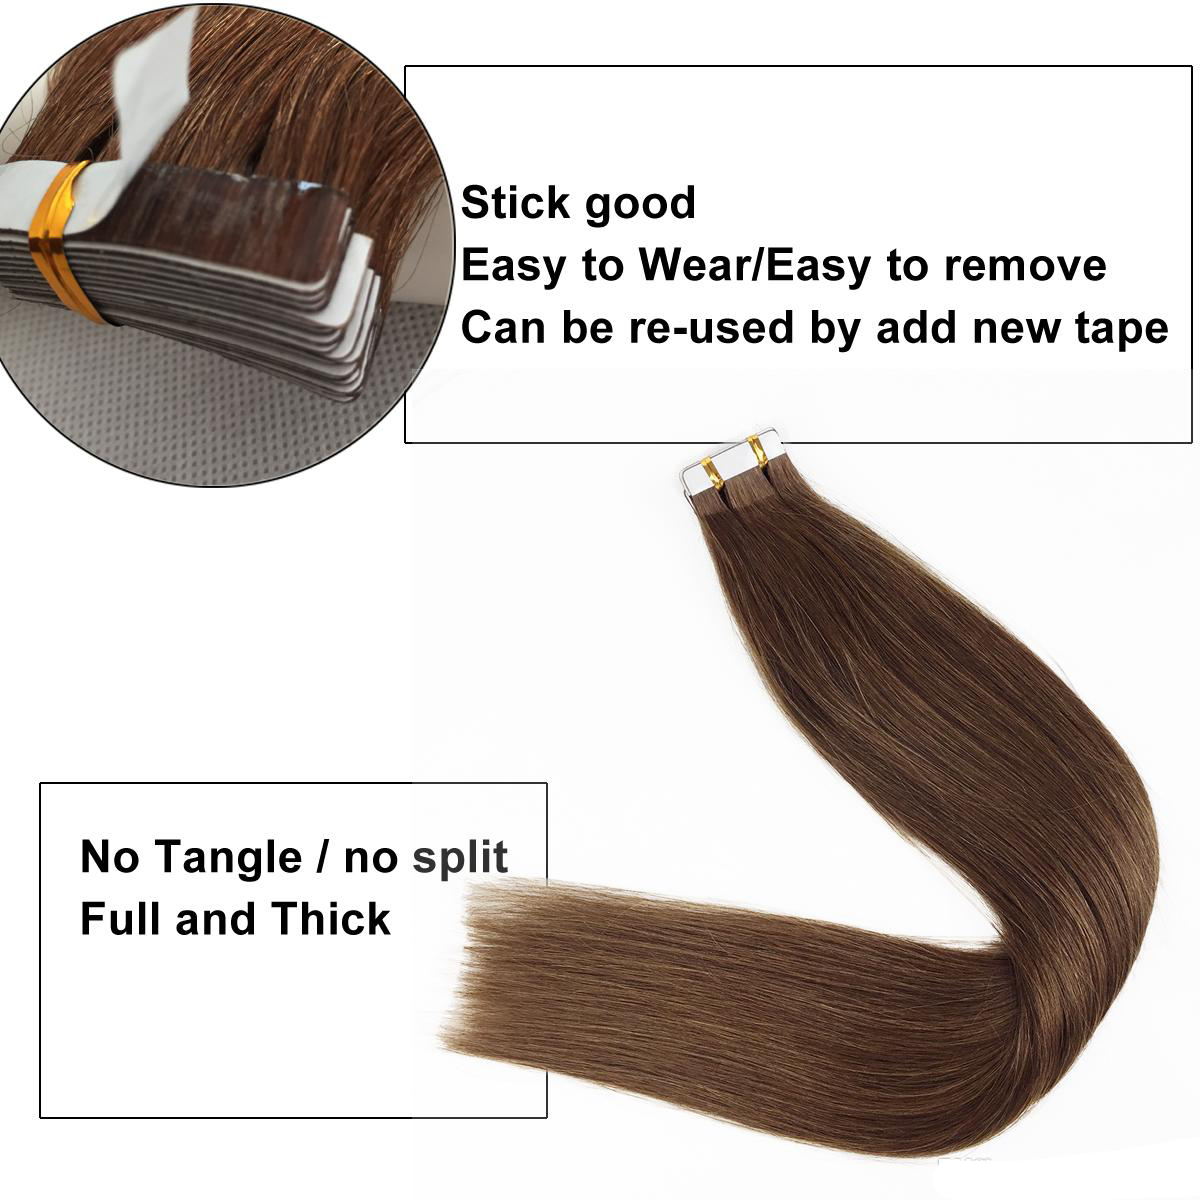 Wholesale Tape In Extensions - Tape in hair extension Silky Straight Human Hair  Wholesale Tape In Extensions - Tape in hair extension Silky Straight Human Hair 